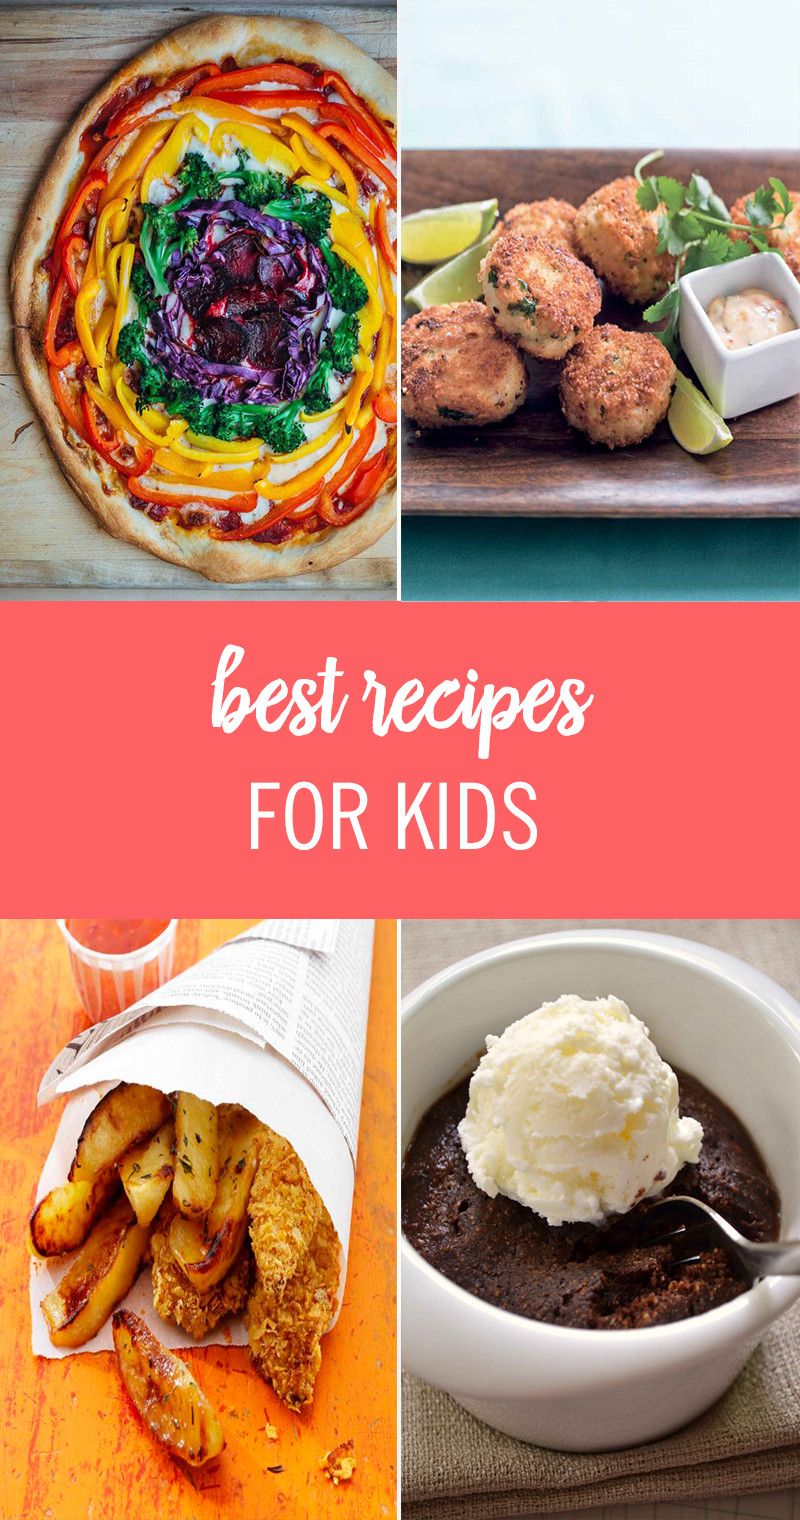 Healthy Snacks For Picky Eaters
 Cooking for Kids 50 Best Recipes for Kids and Picky Eaters